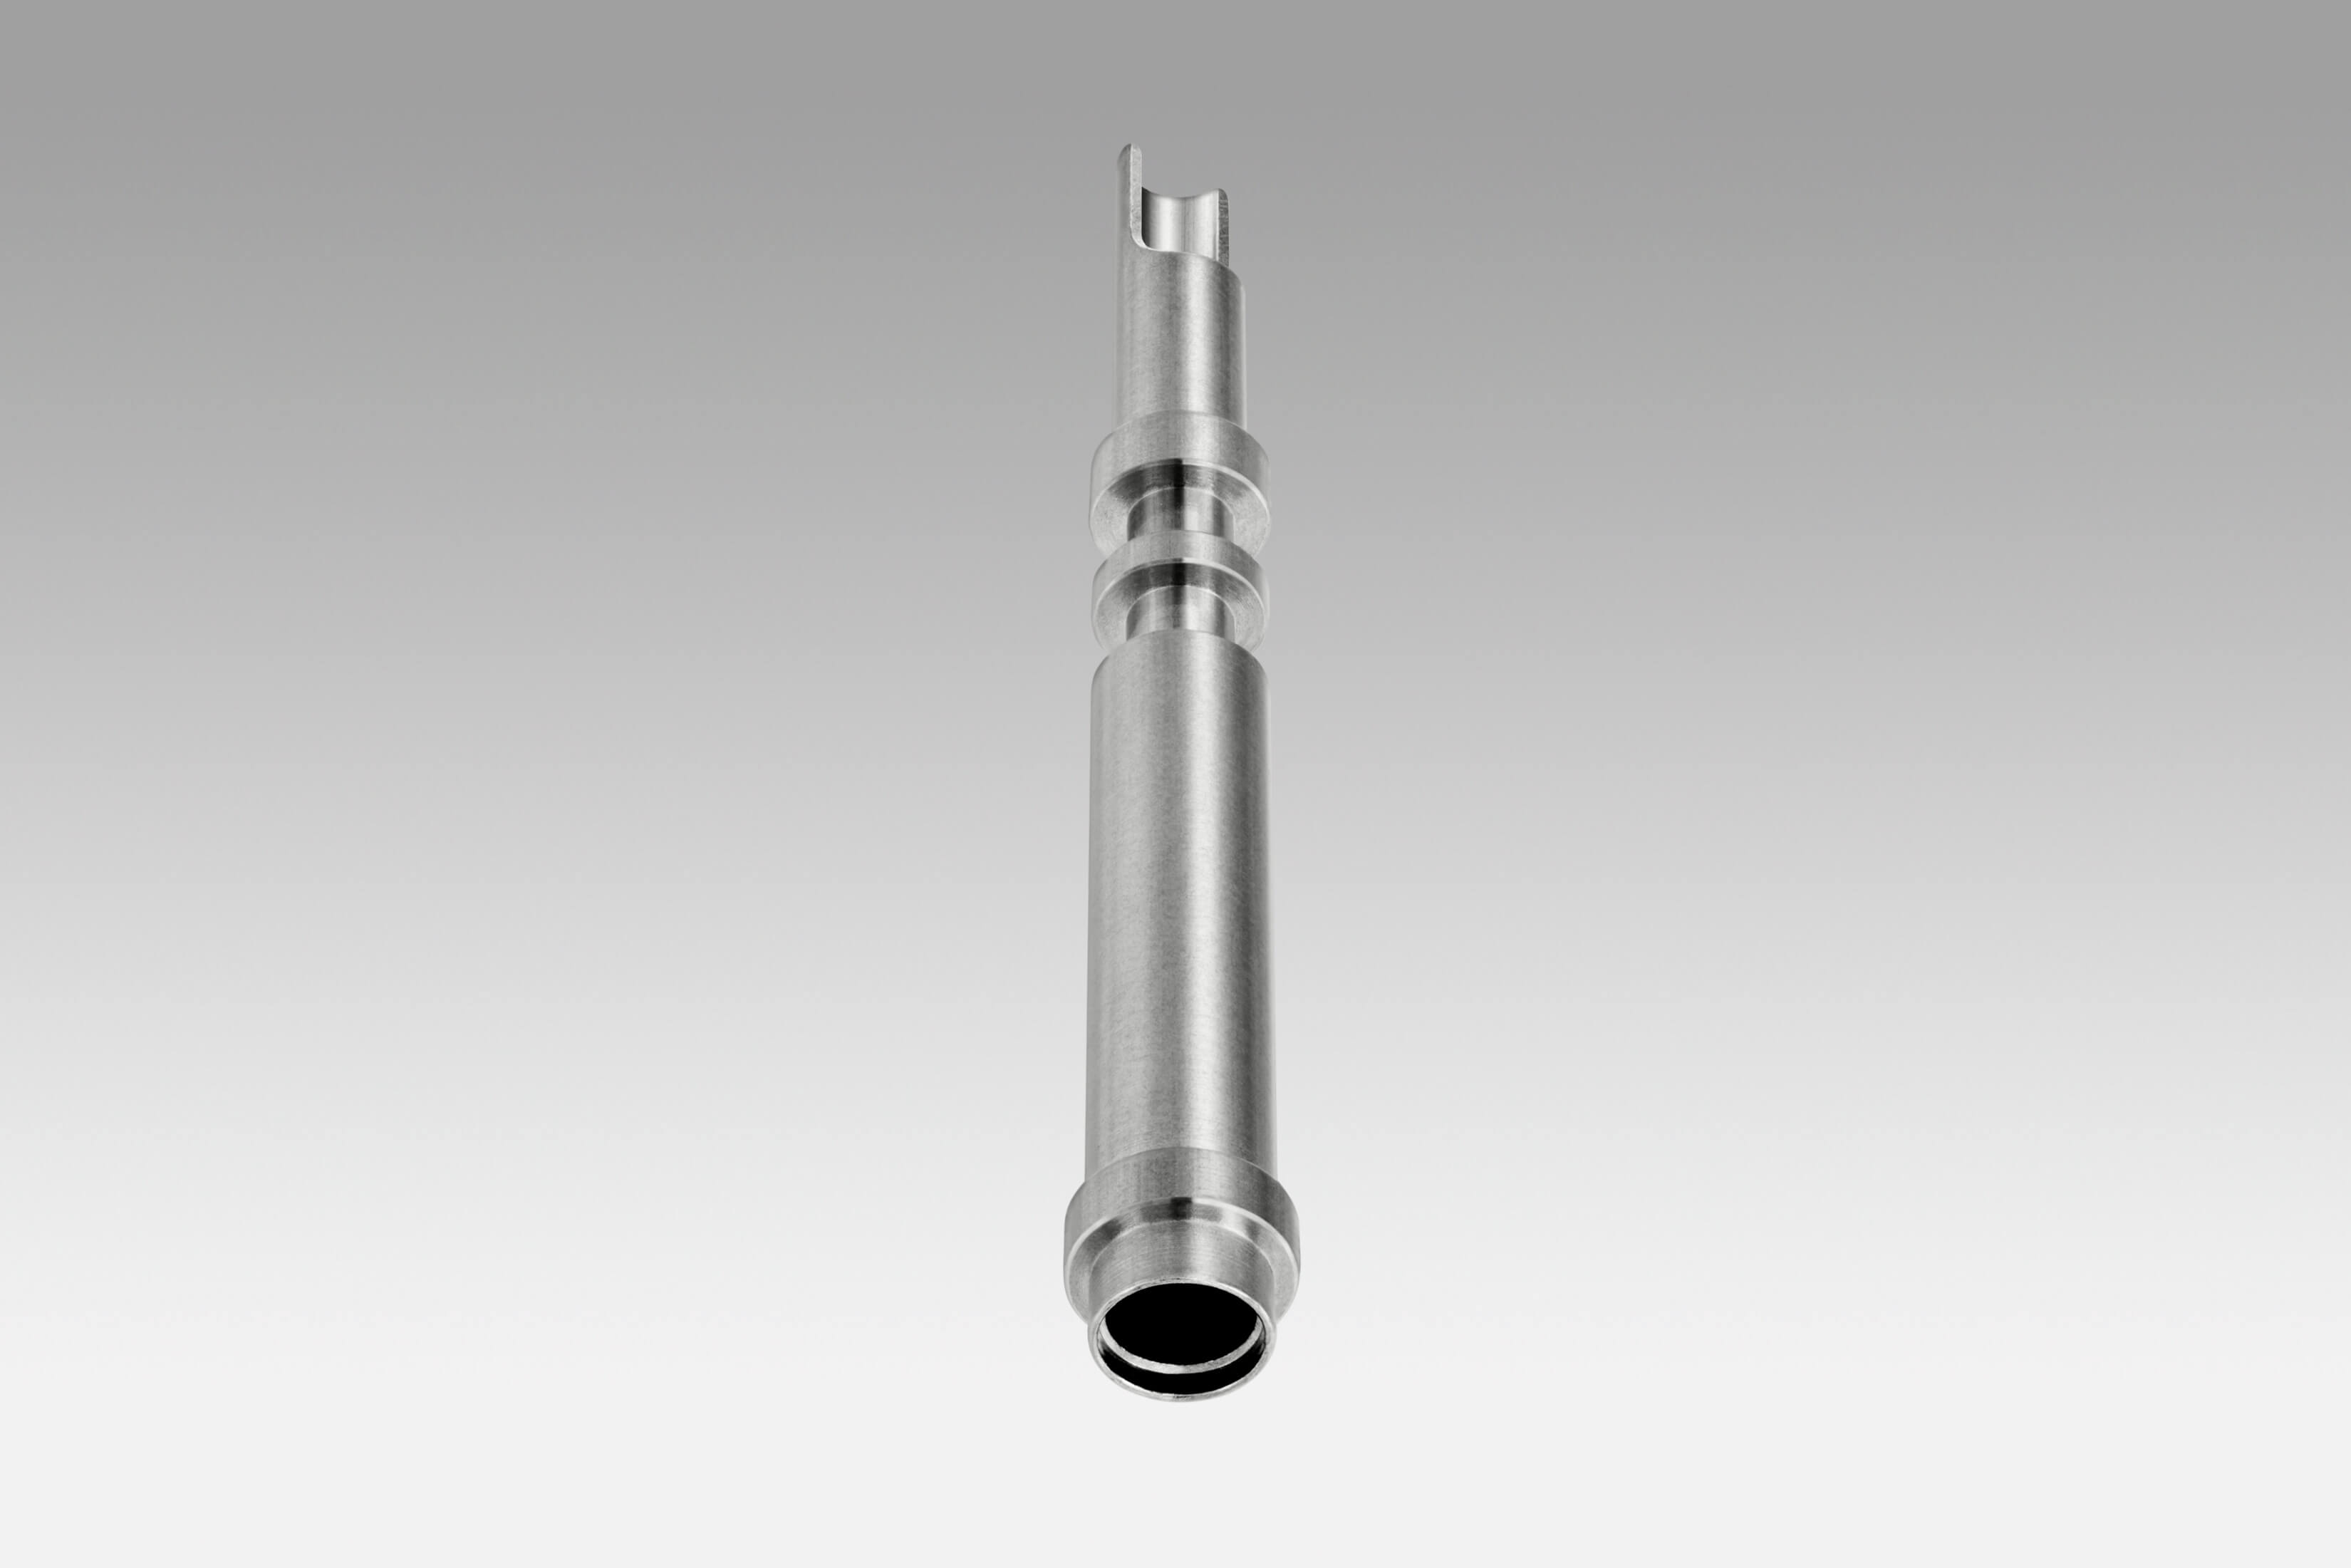 : Contact, spindle - Swiss supplier and manufacturer of micro-components for electronics